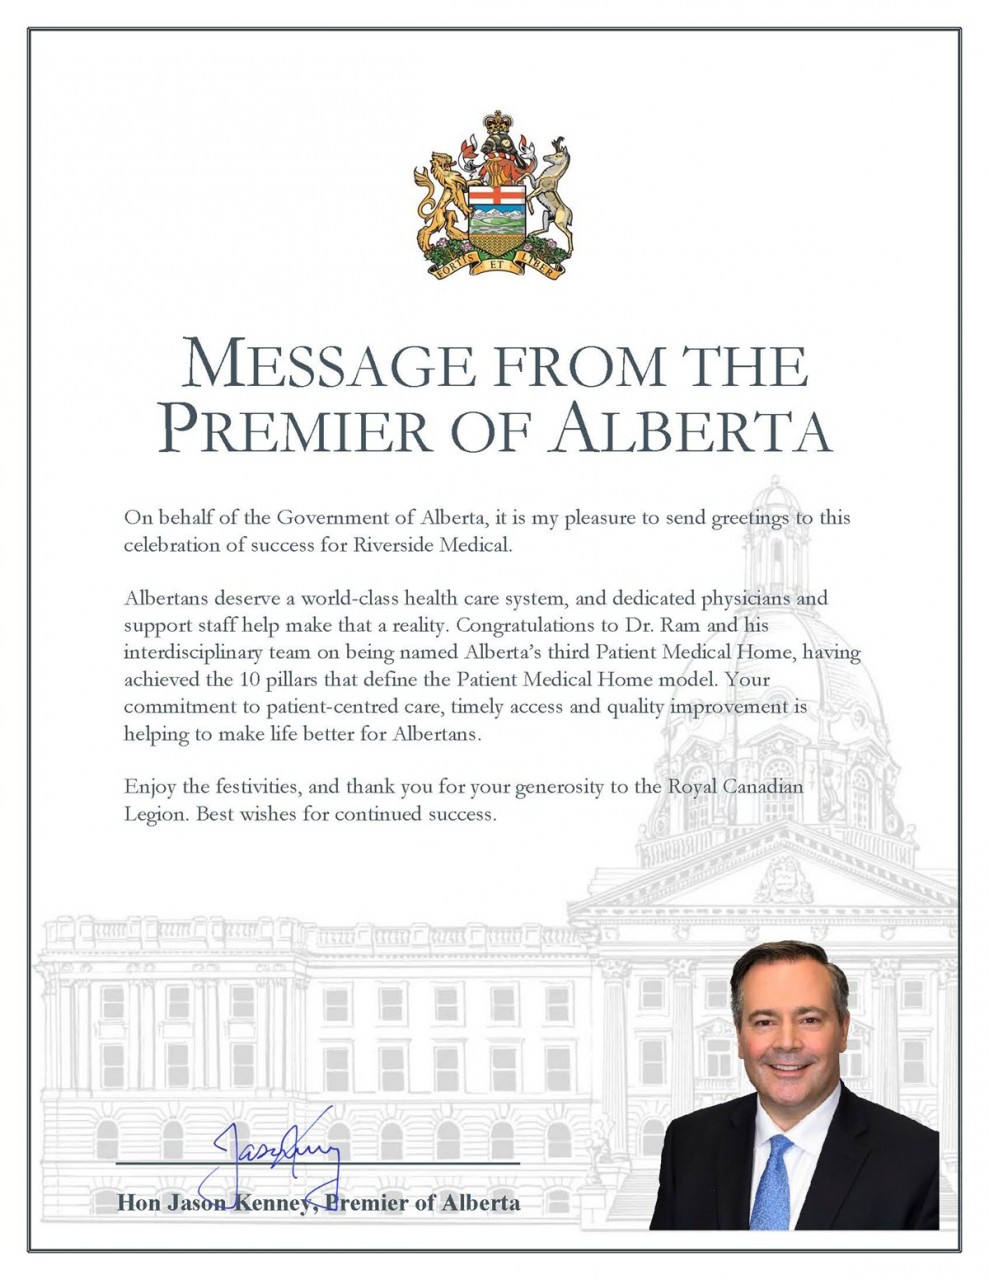 Riverside_Medical_Message_from_the_Premier_of_Alberta